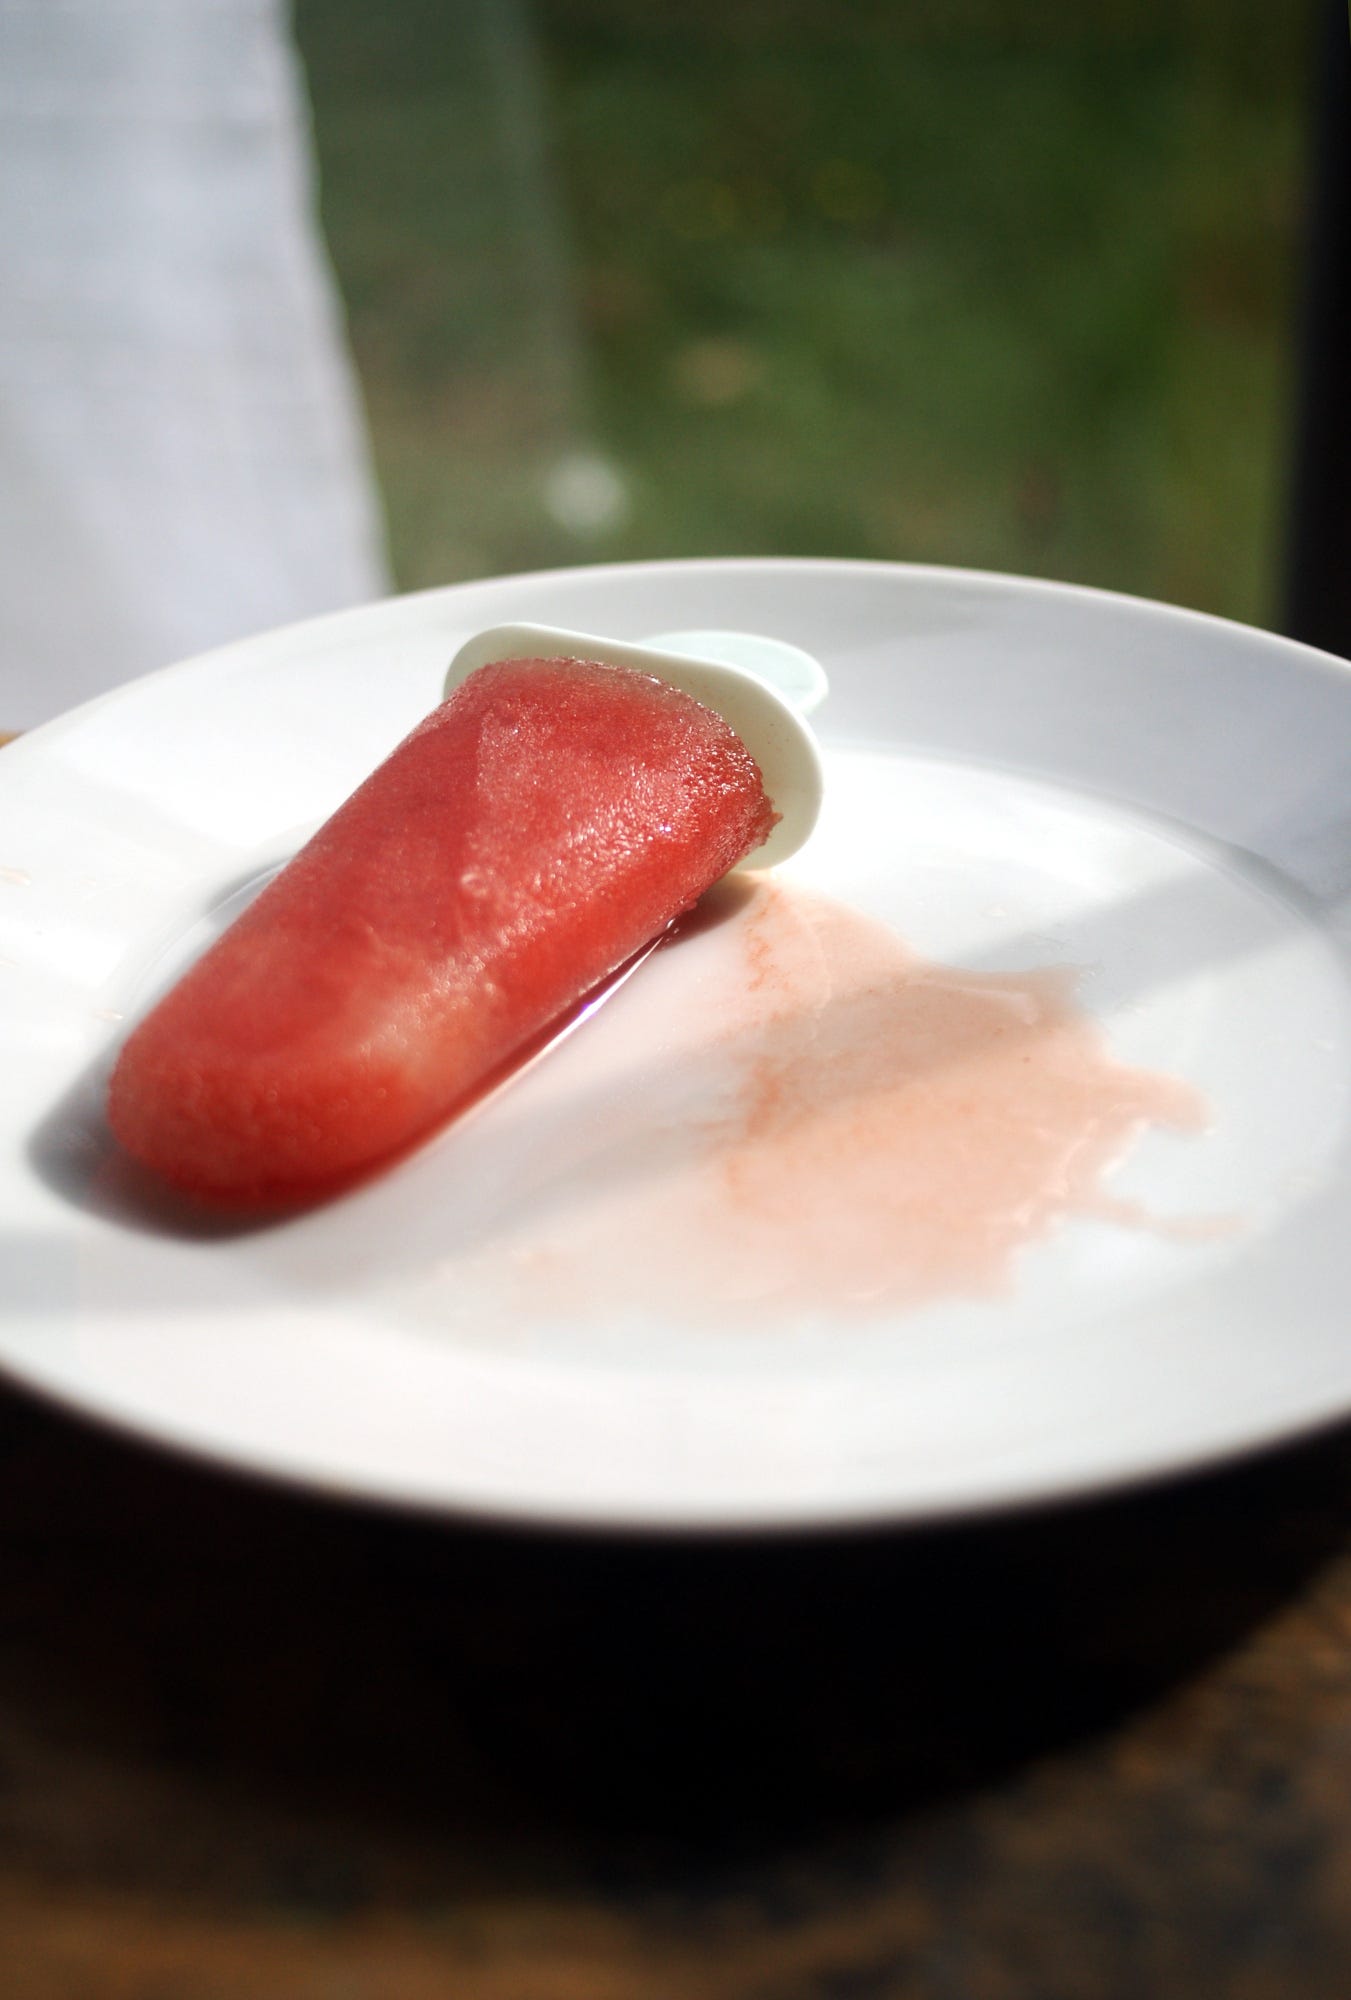 Watermelon ice lollies From France with Love